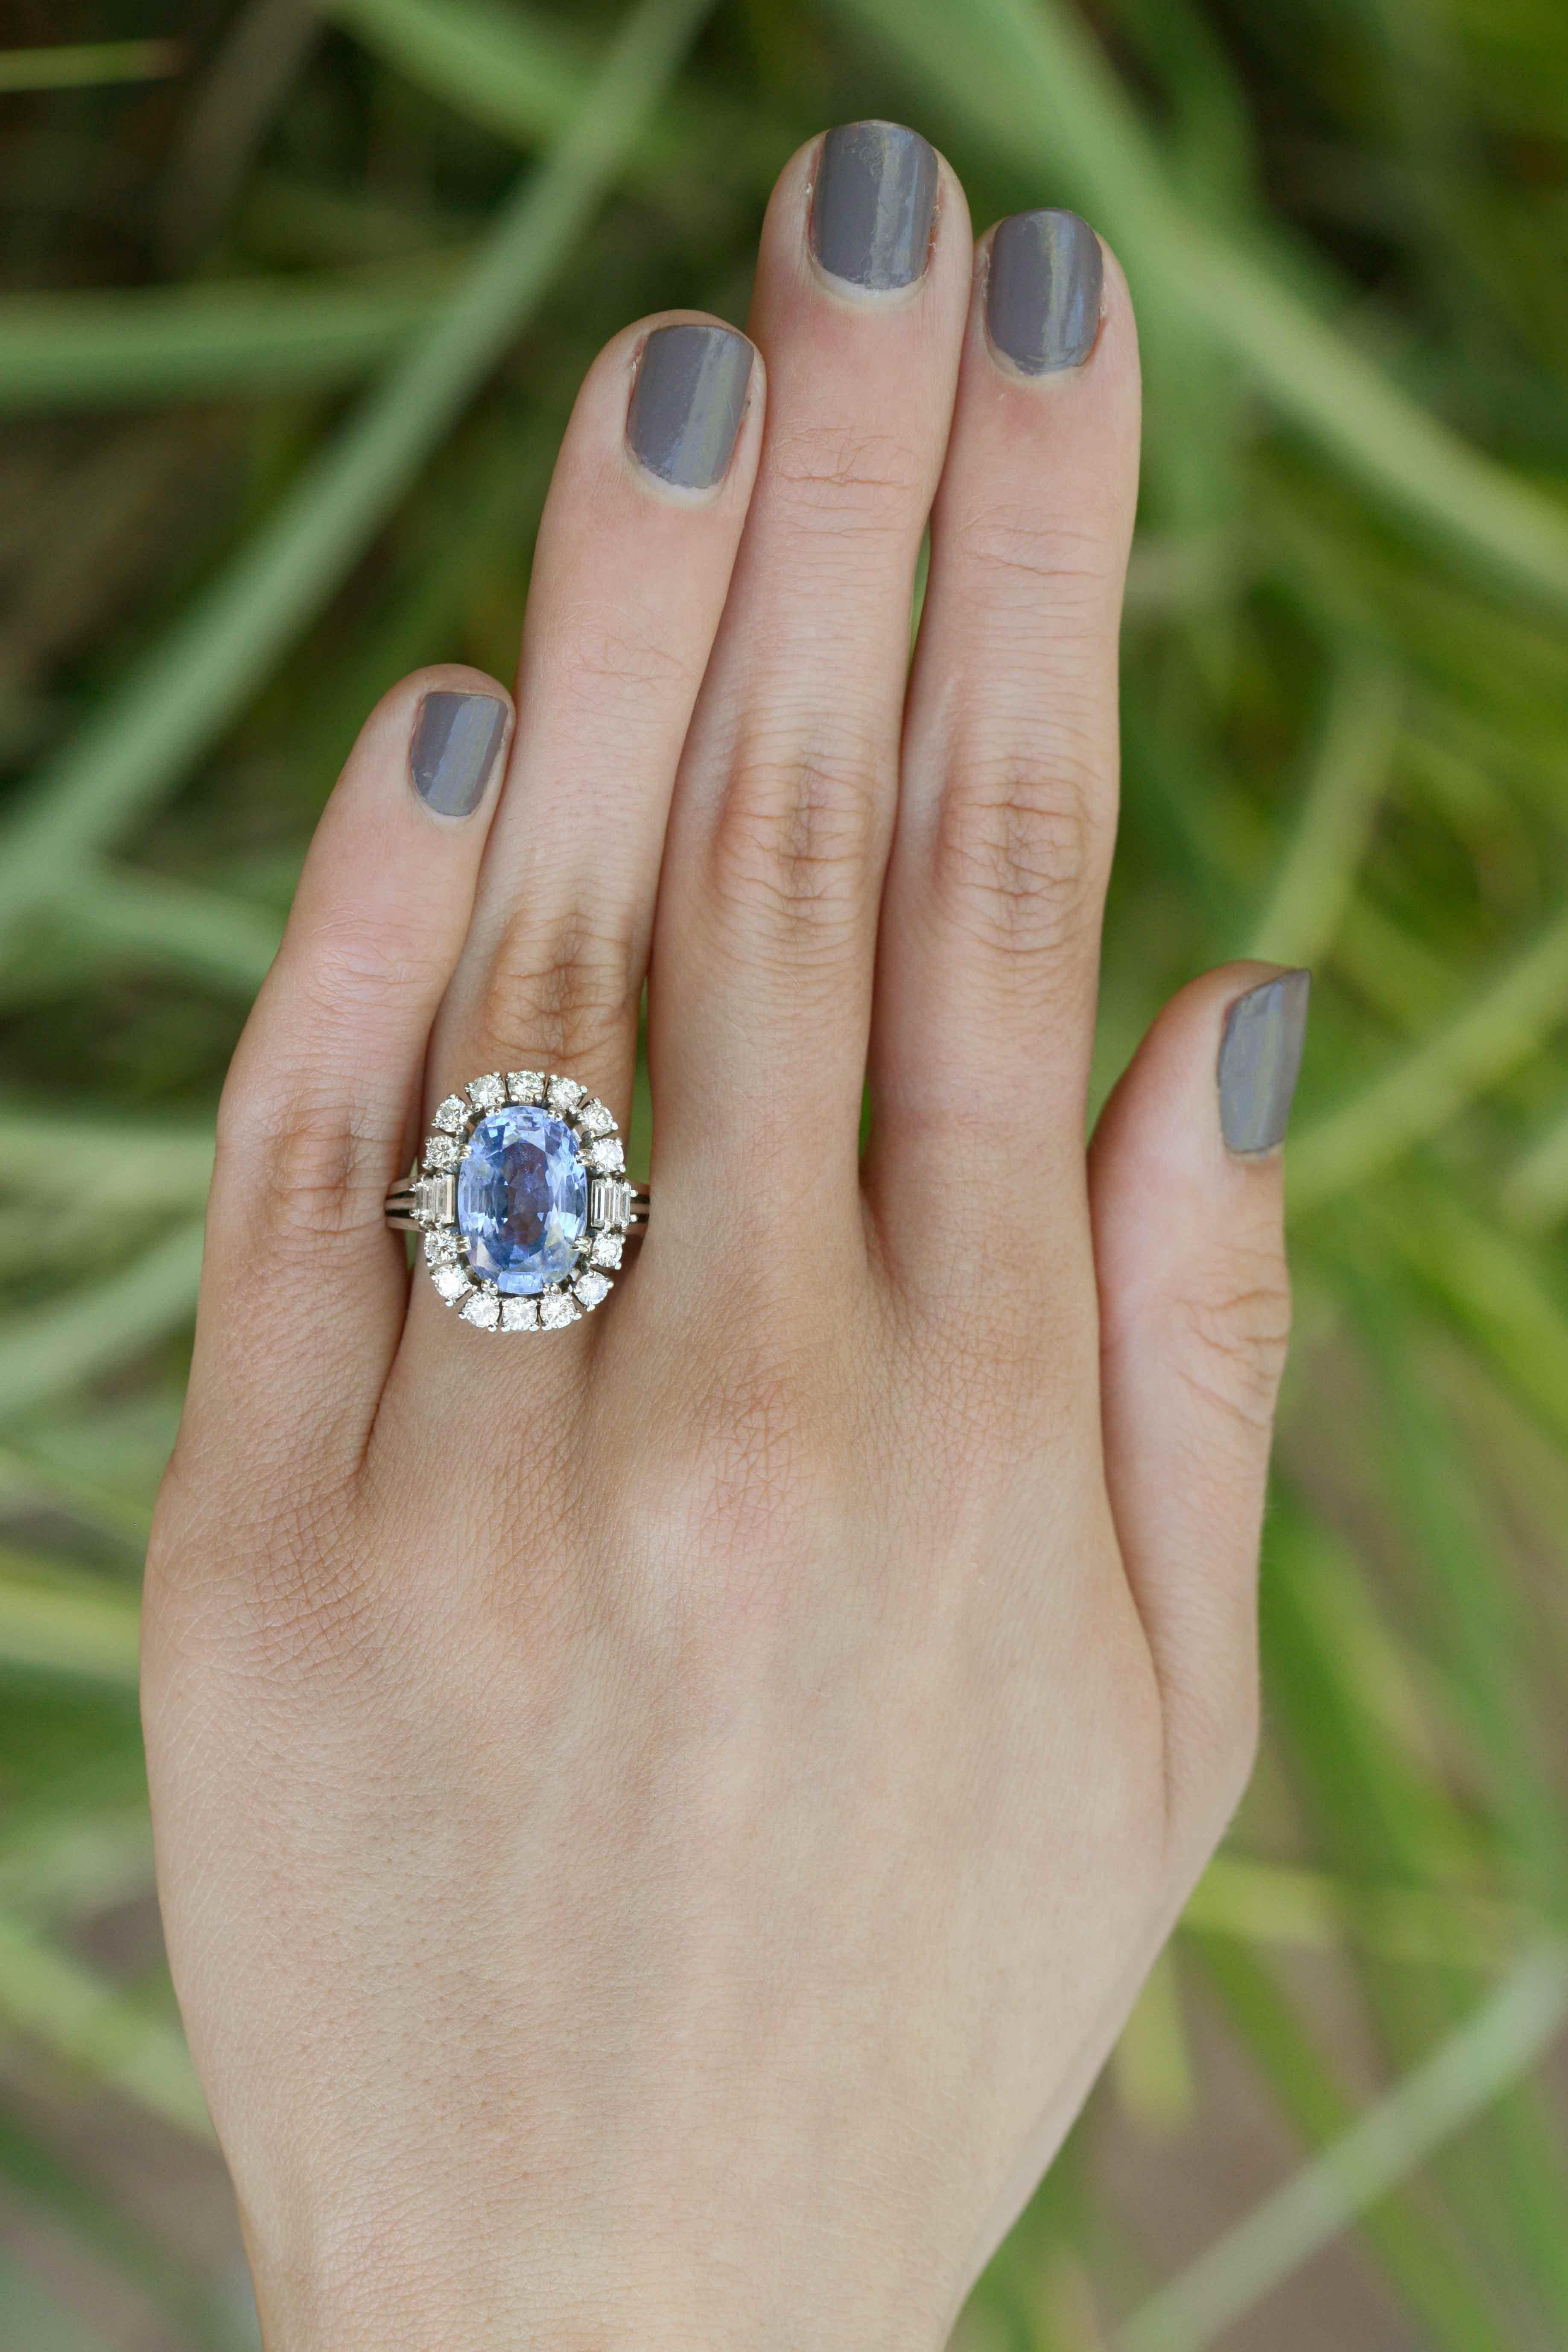 The San Francisco 7 carat Ceylon sapphire engagement ring is centered by a dreamy, velvety, cornflower blue sapphire certified as no heat by the American Gemological Laboratory. Yes, this vintage estate heirloom it has a pedigree and is destined for